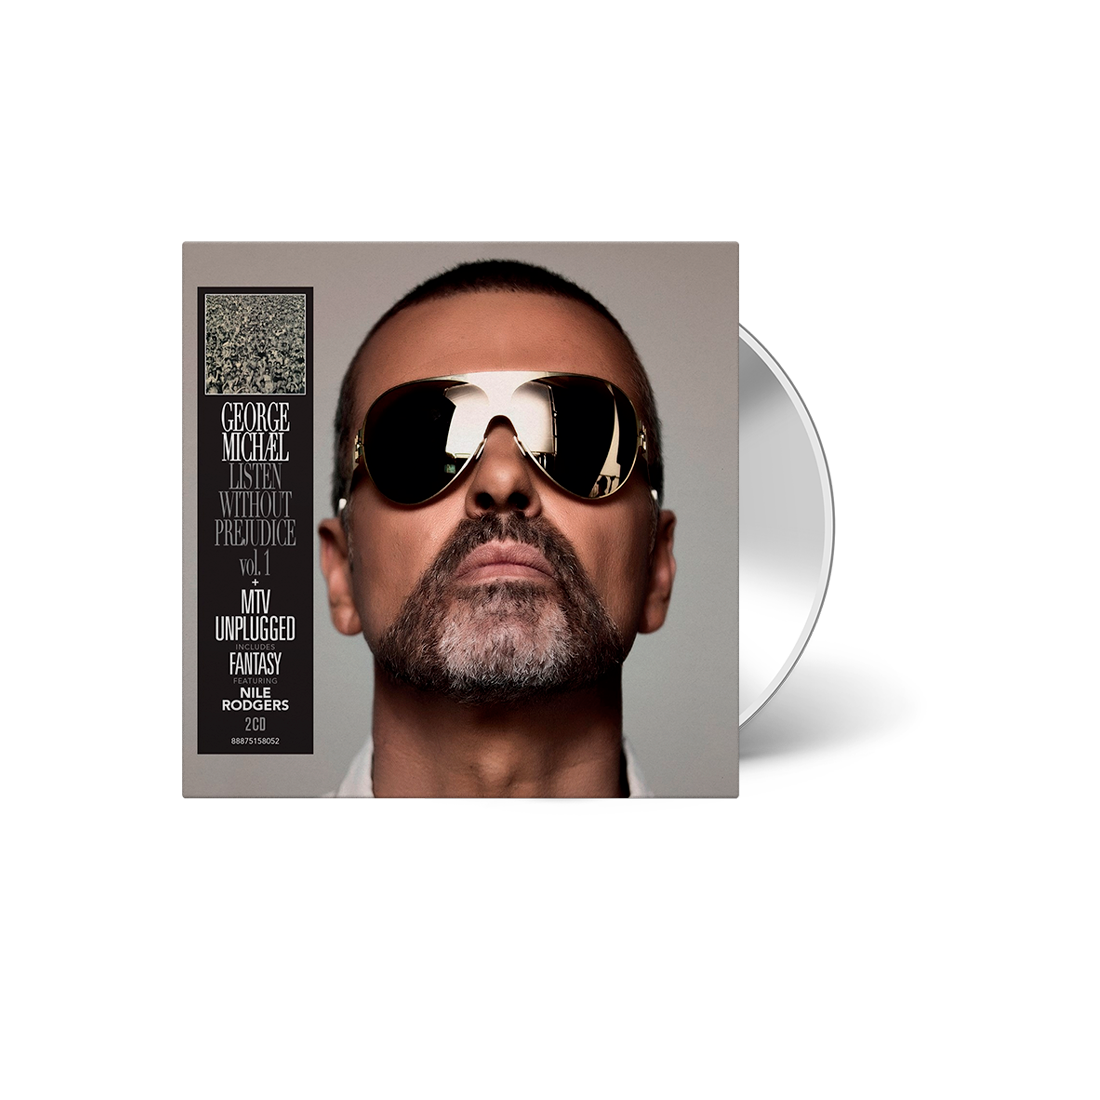 Older (CD) | George Michael | The Official Store